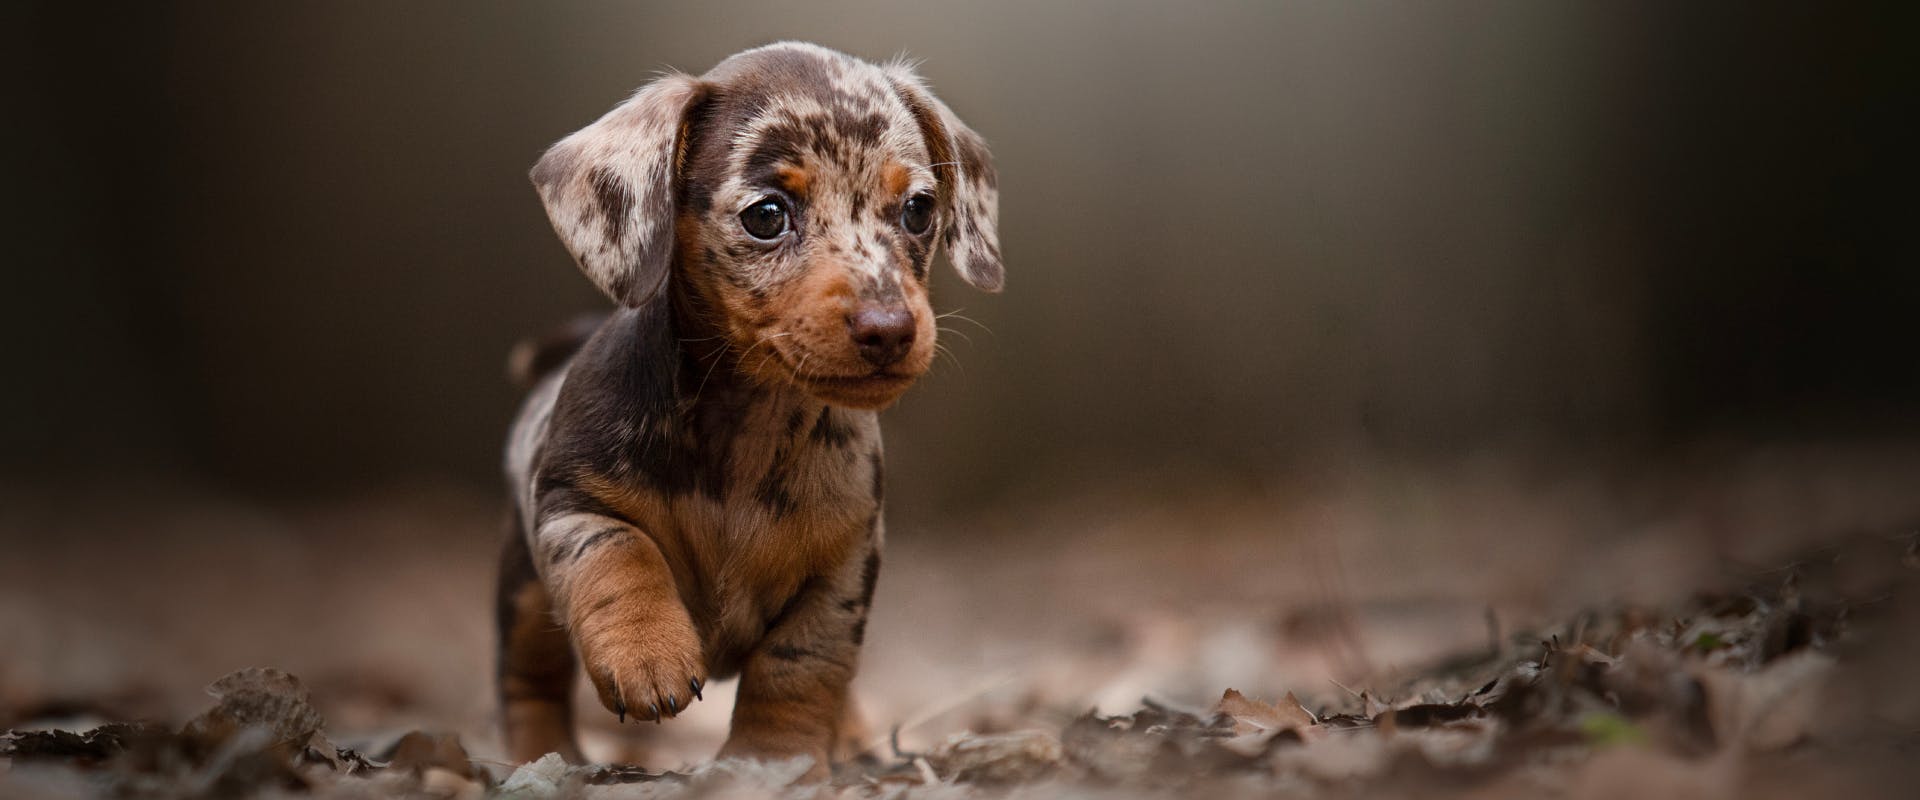 a dachshund puppy trotting along a path of dead leaves